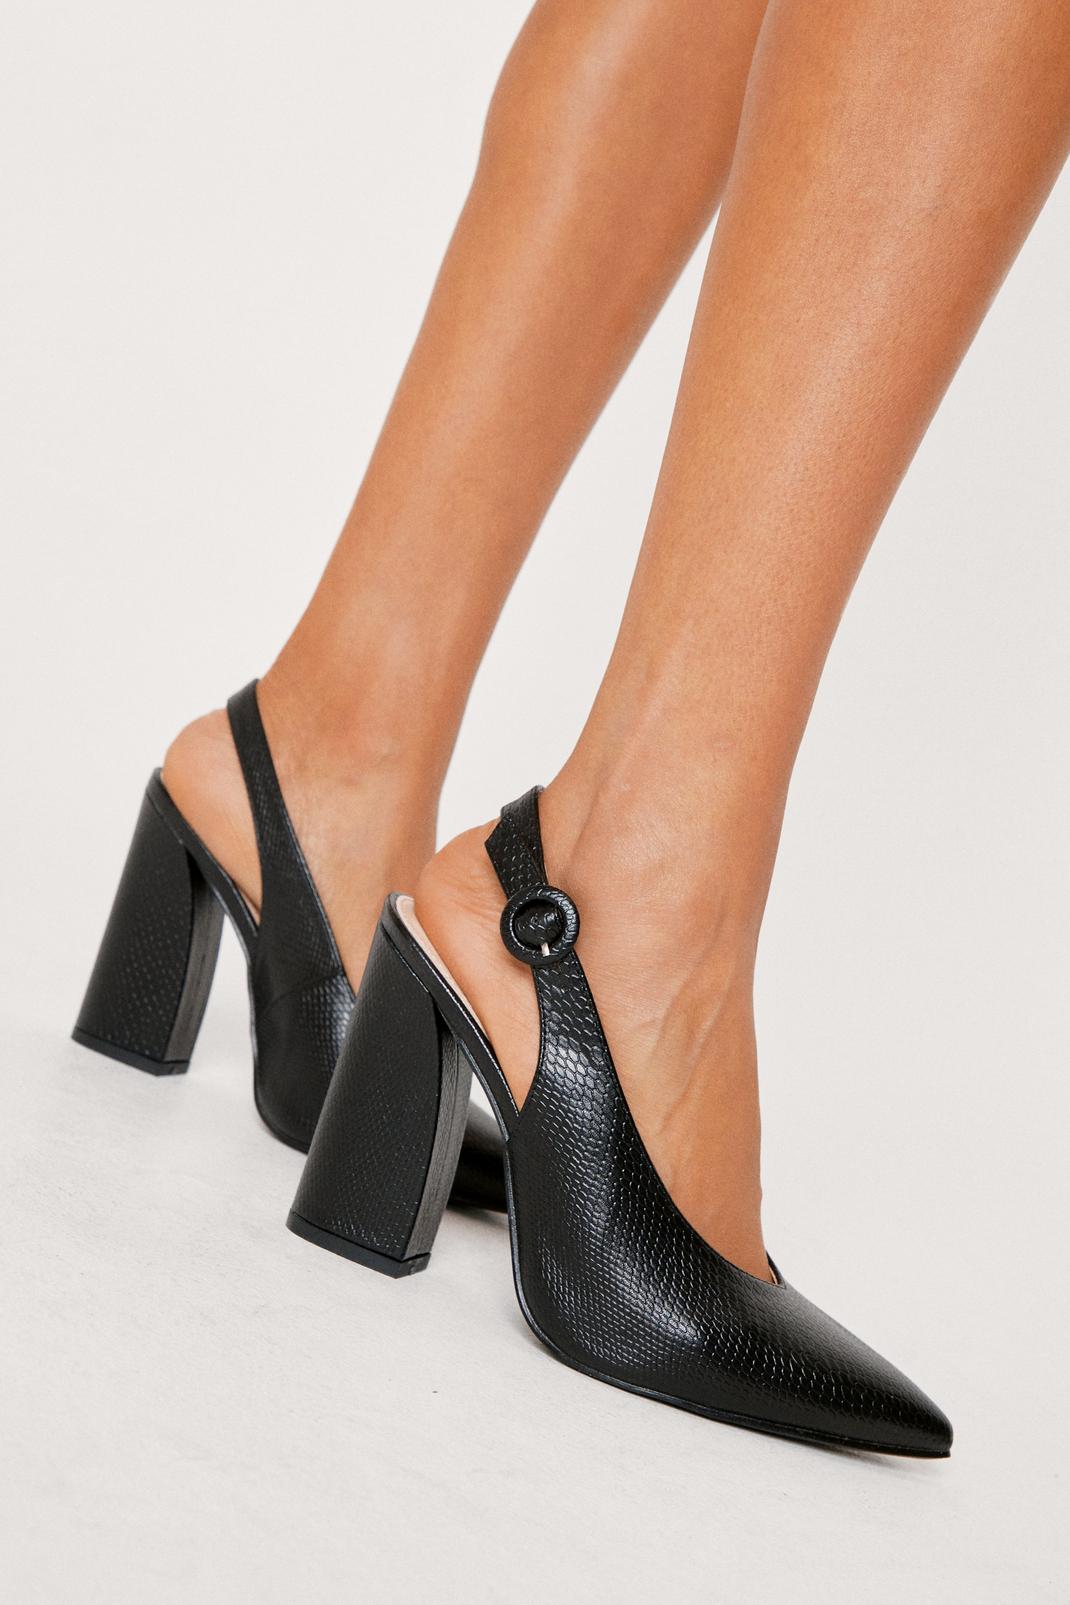 Faux Leather Snake Print Pointed Heels Nasty Gal